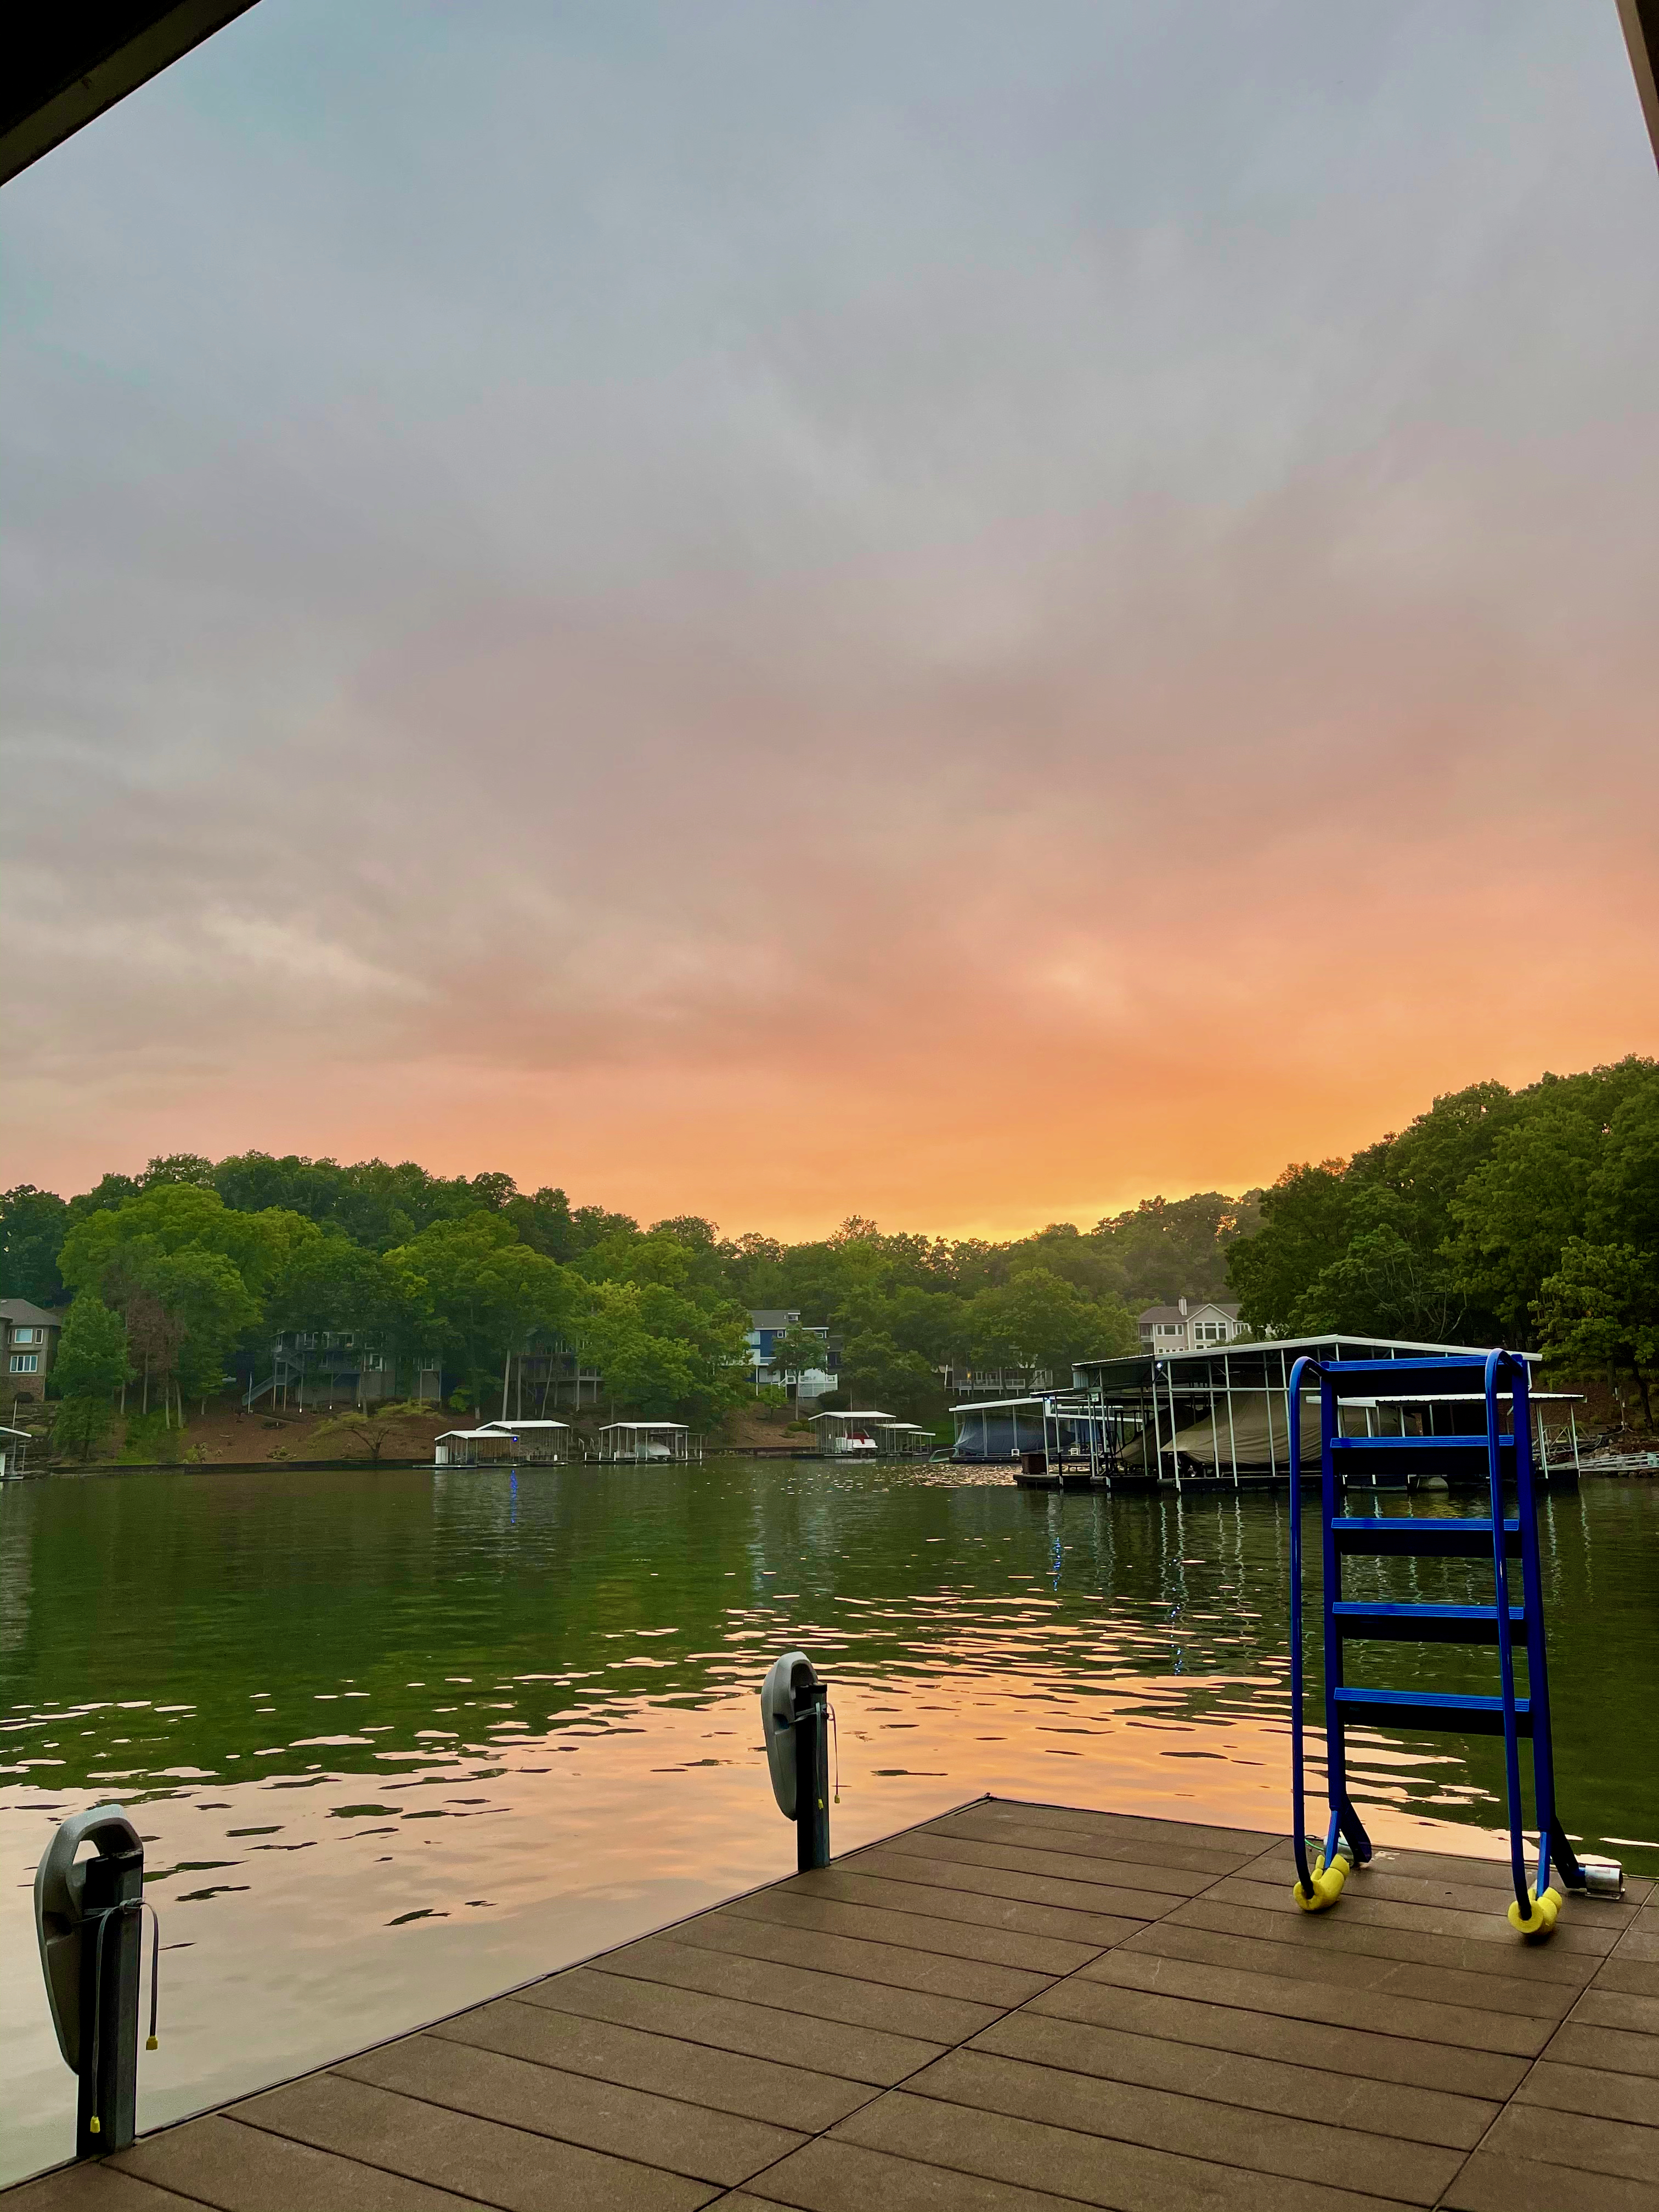 Beautiful sunset over Lake of the Ozarks from the dock